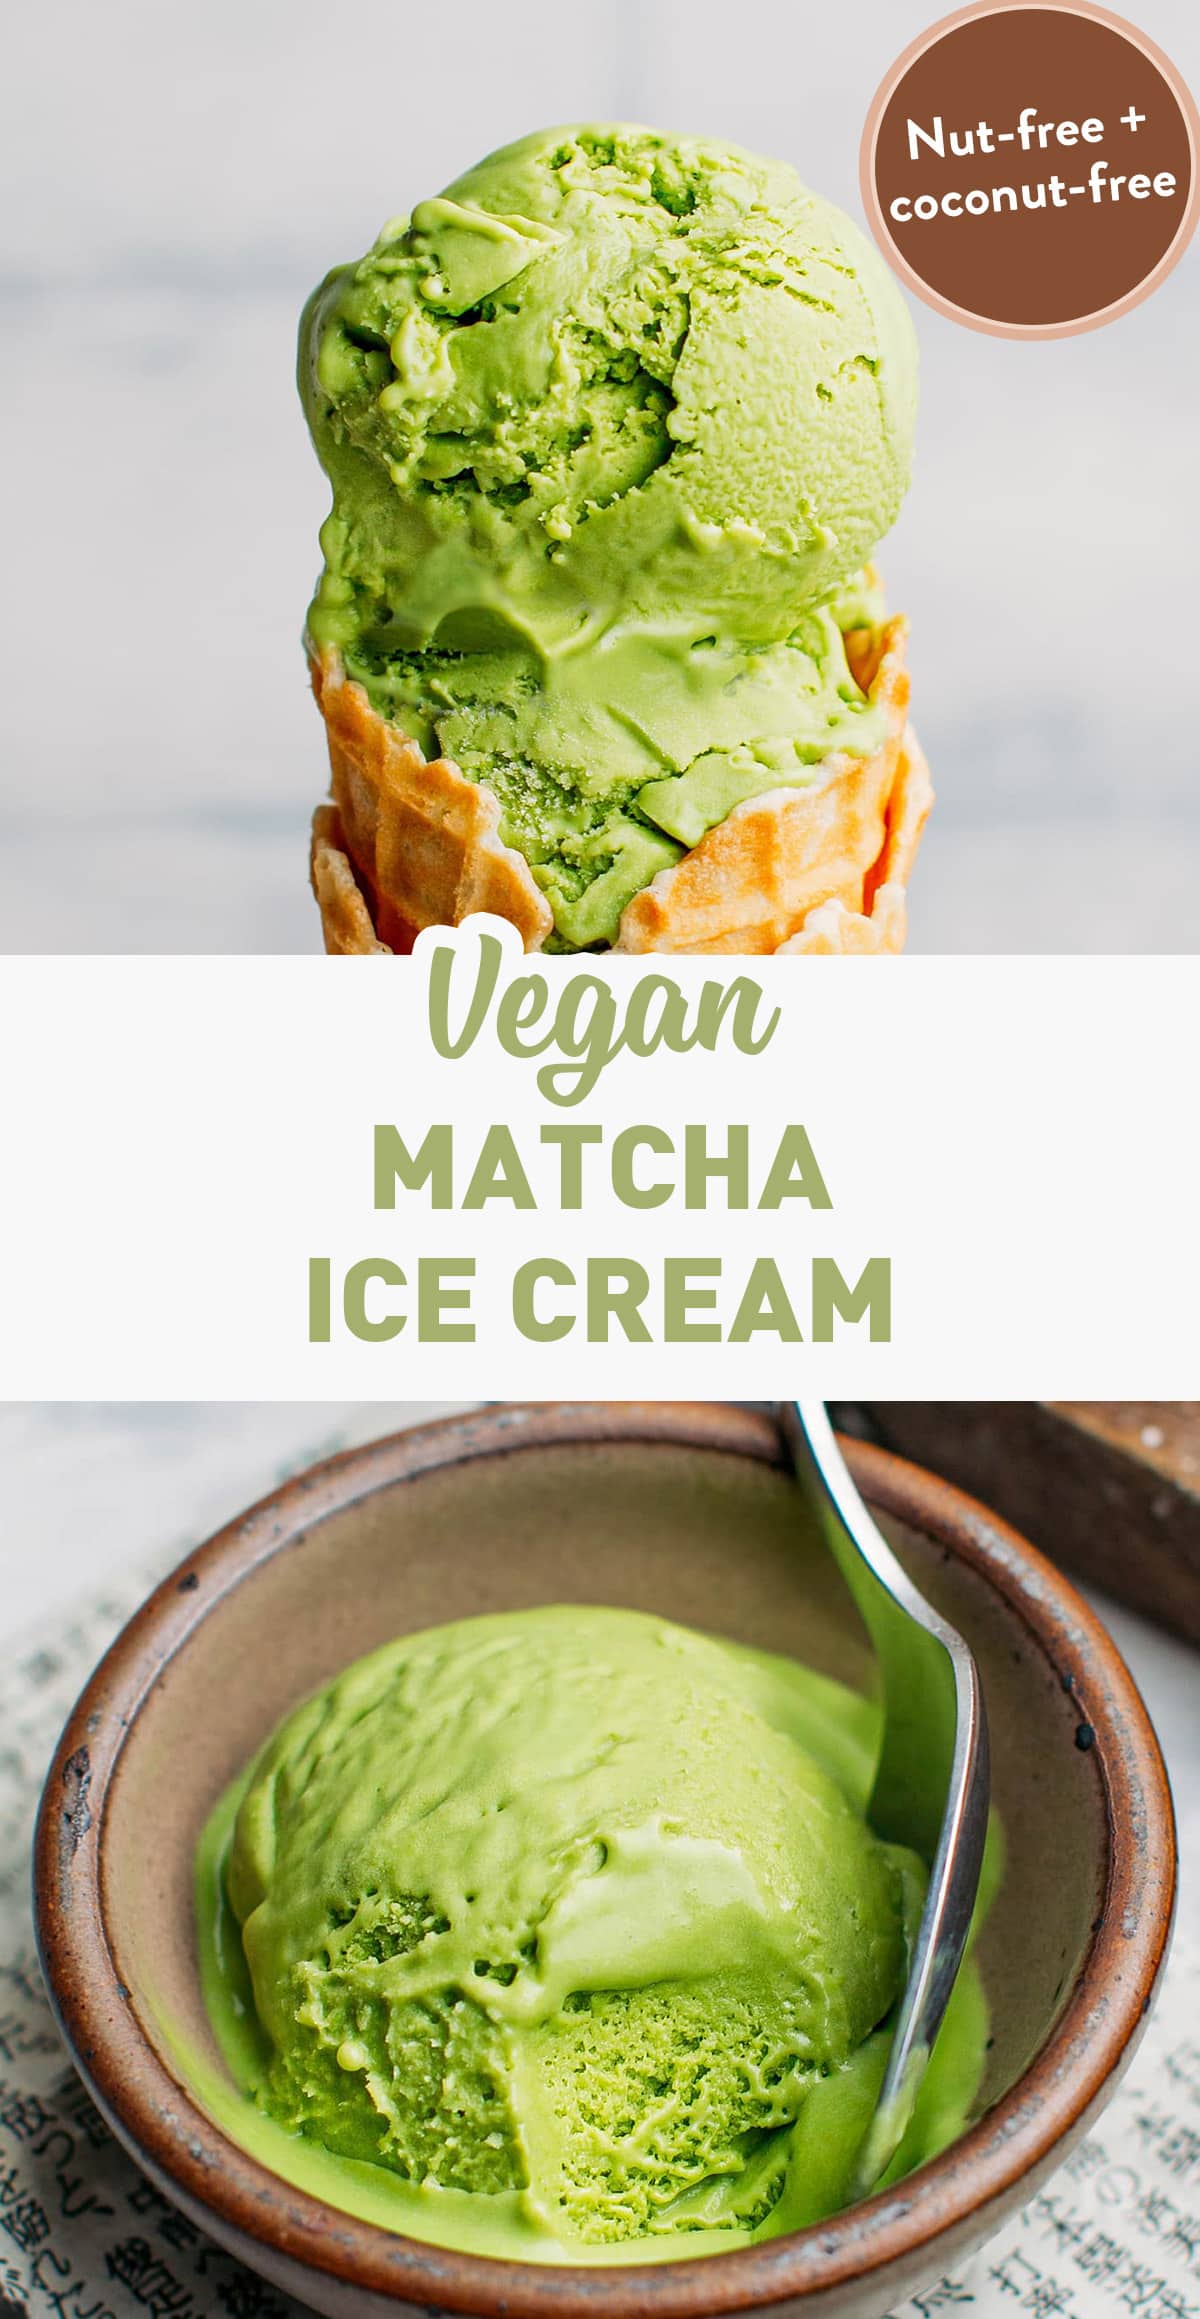 Introducing the best vegan matcha ice cream! Infused with an intense green tea flavor, this dairy-free ice cream is insanely creamy with a velvety mouthfeel. Plus, it is nut-free, gluten-free, and coconut-free! #matcha #veganicecream